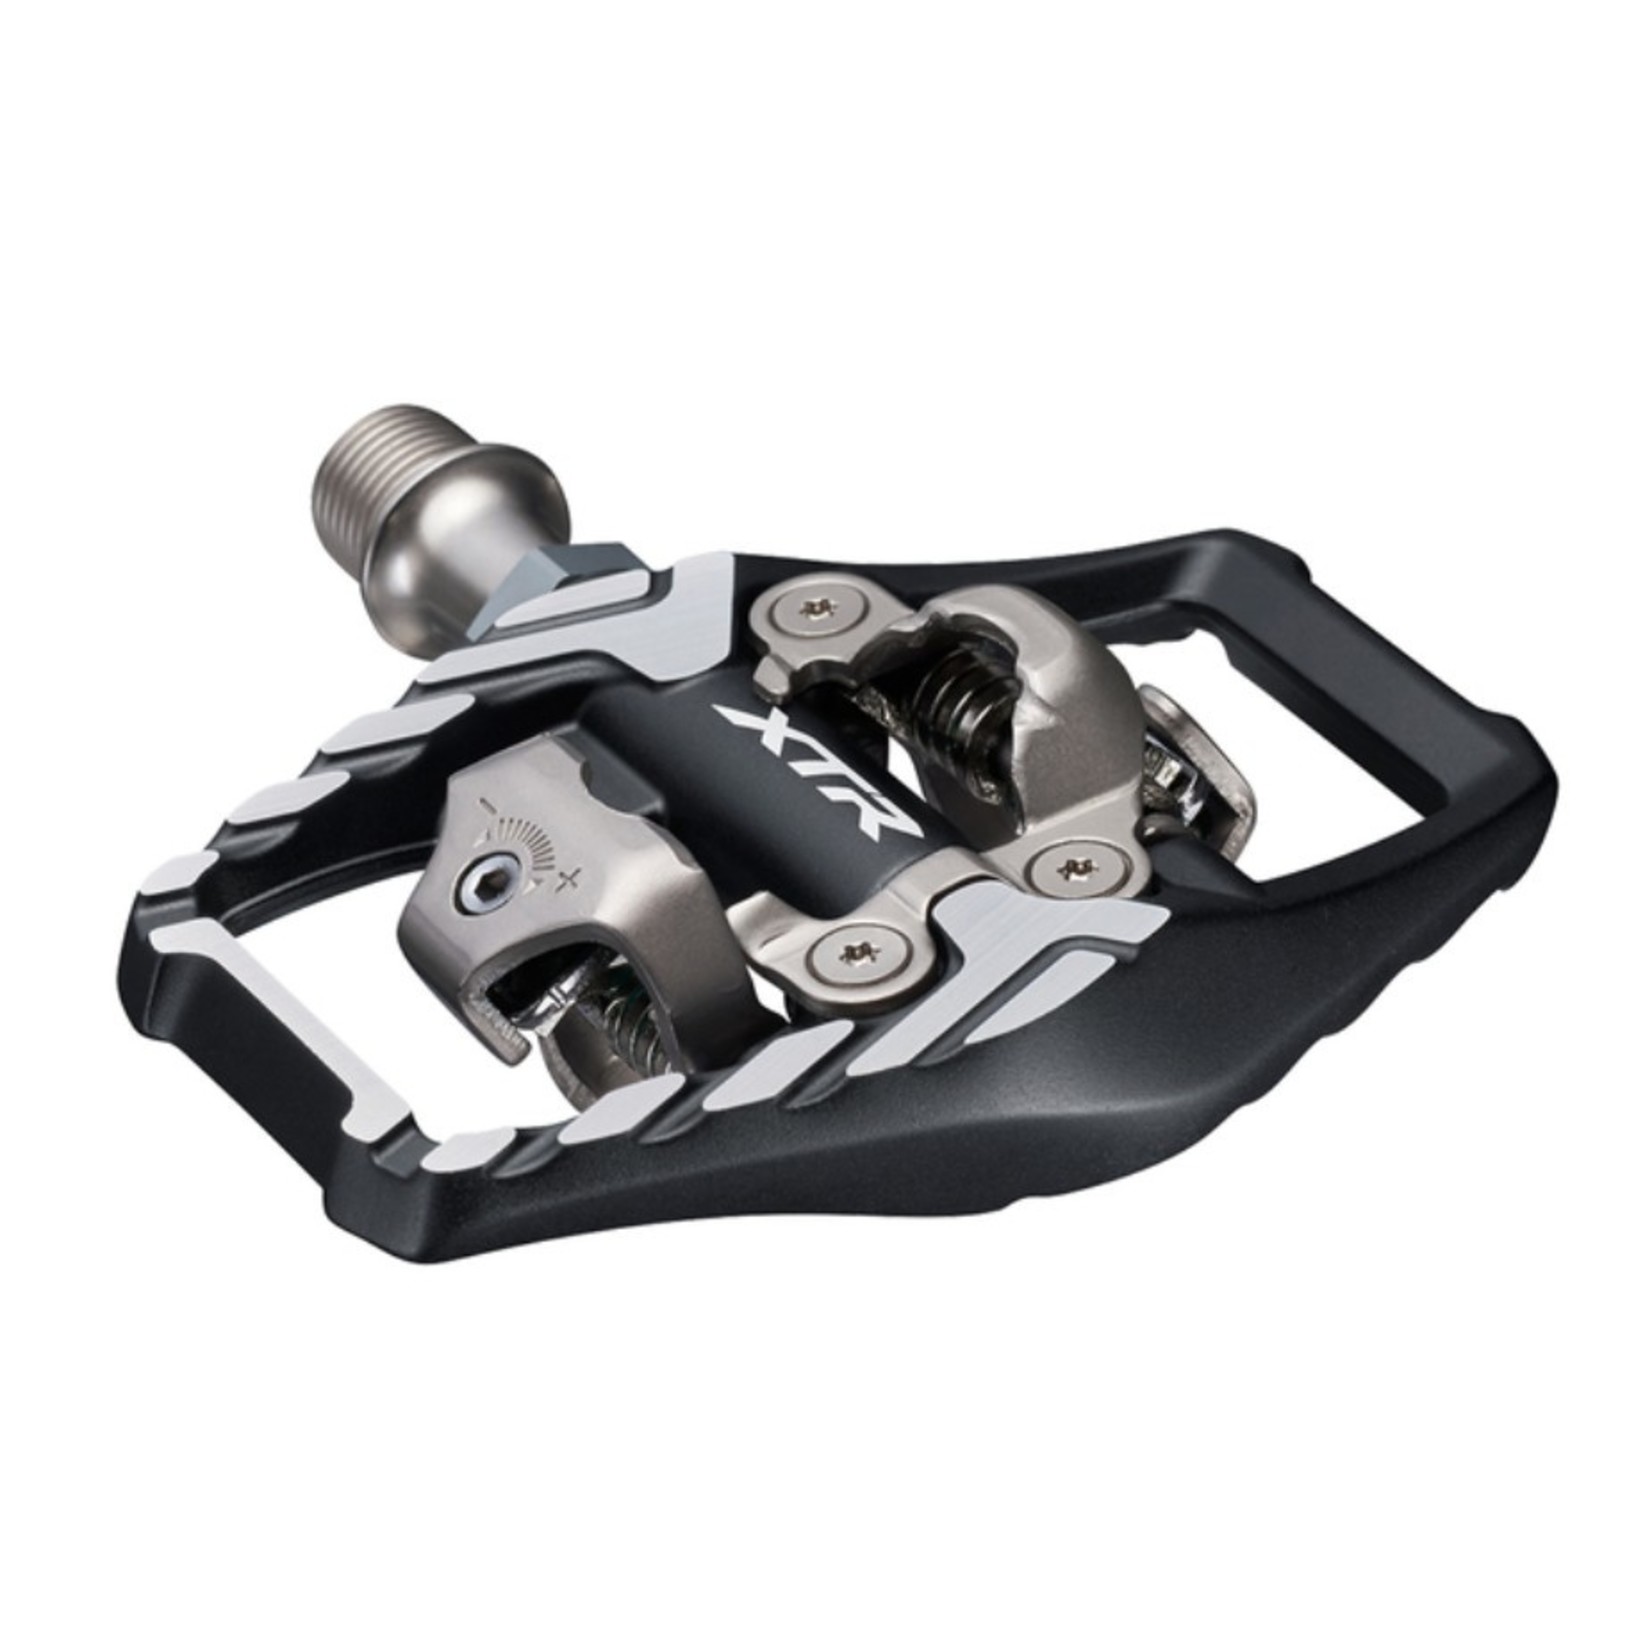 Shimano PEDAL, PD-M9120, XTR, SPD PEDAL, W/O REFLECTOR, W/CLEAT(